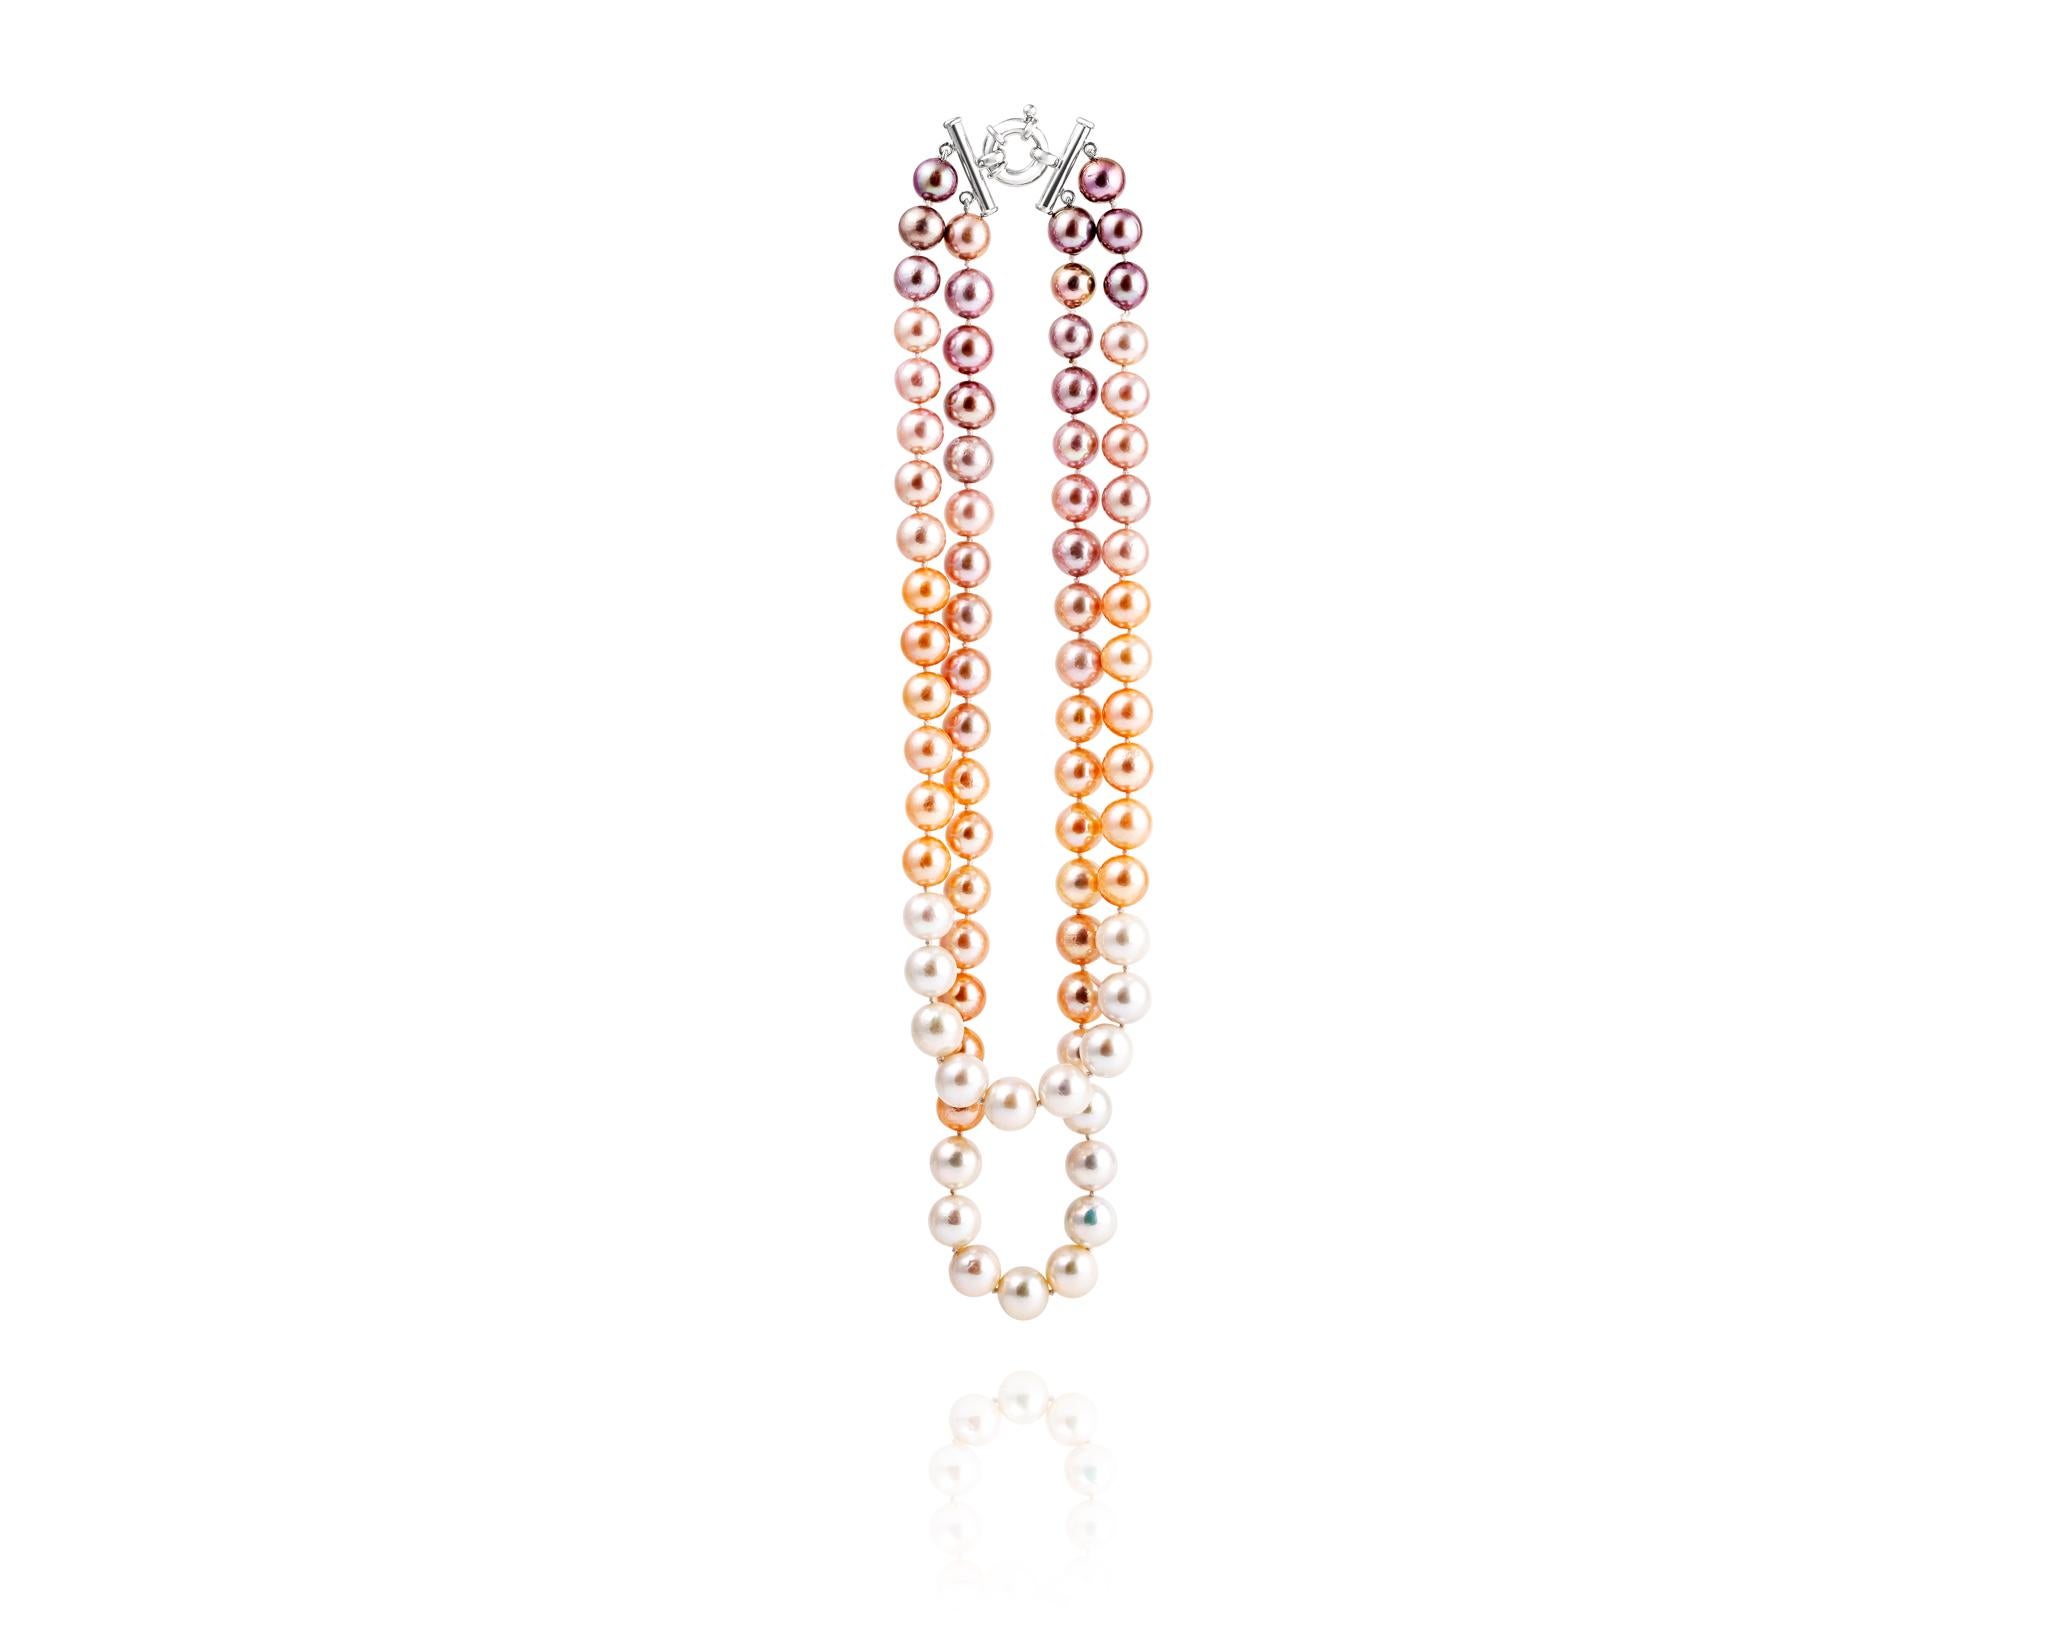 Part of the Vincent Peach Pearl Collection, the Double Ombre Edison Pearl Necklace features a weighty and luxurious strand of Freshwater and colorful Edison Pearls on a Double Line Necklace with a chunky Sterling Silver Clasp. The top strand of